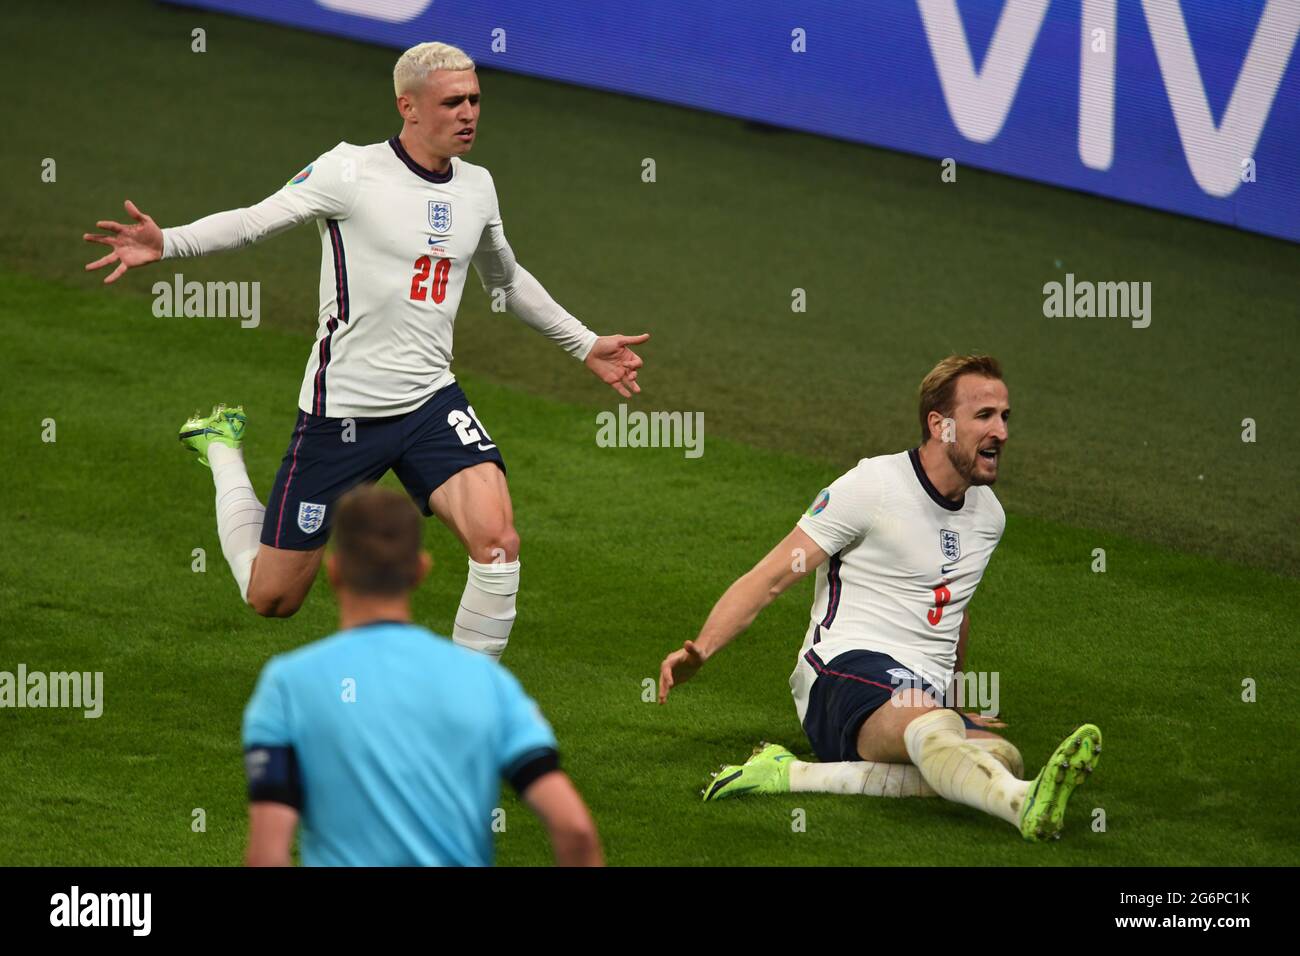 Harry Kane (England)Phil Foden (England) celebrates after scoring his team's second goal during the Uefa 'European Championship 2020 Semifinals match between England 2-1 Denmark at Wembley Stadium on July 07, 2021 in London, England. Credit: Maurizio Borsari/AFLO/Alamy Live News Stock Photo